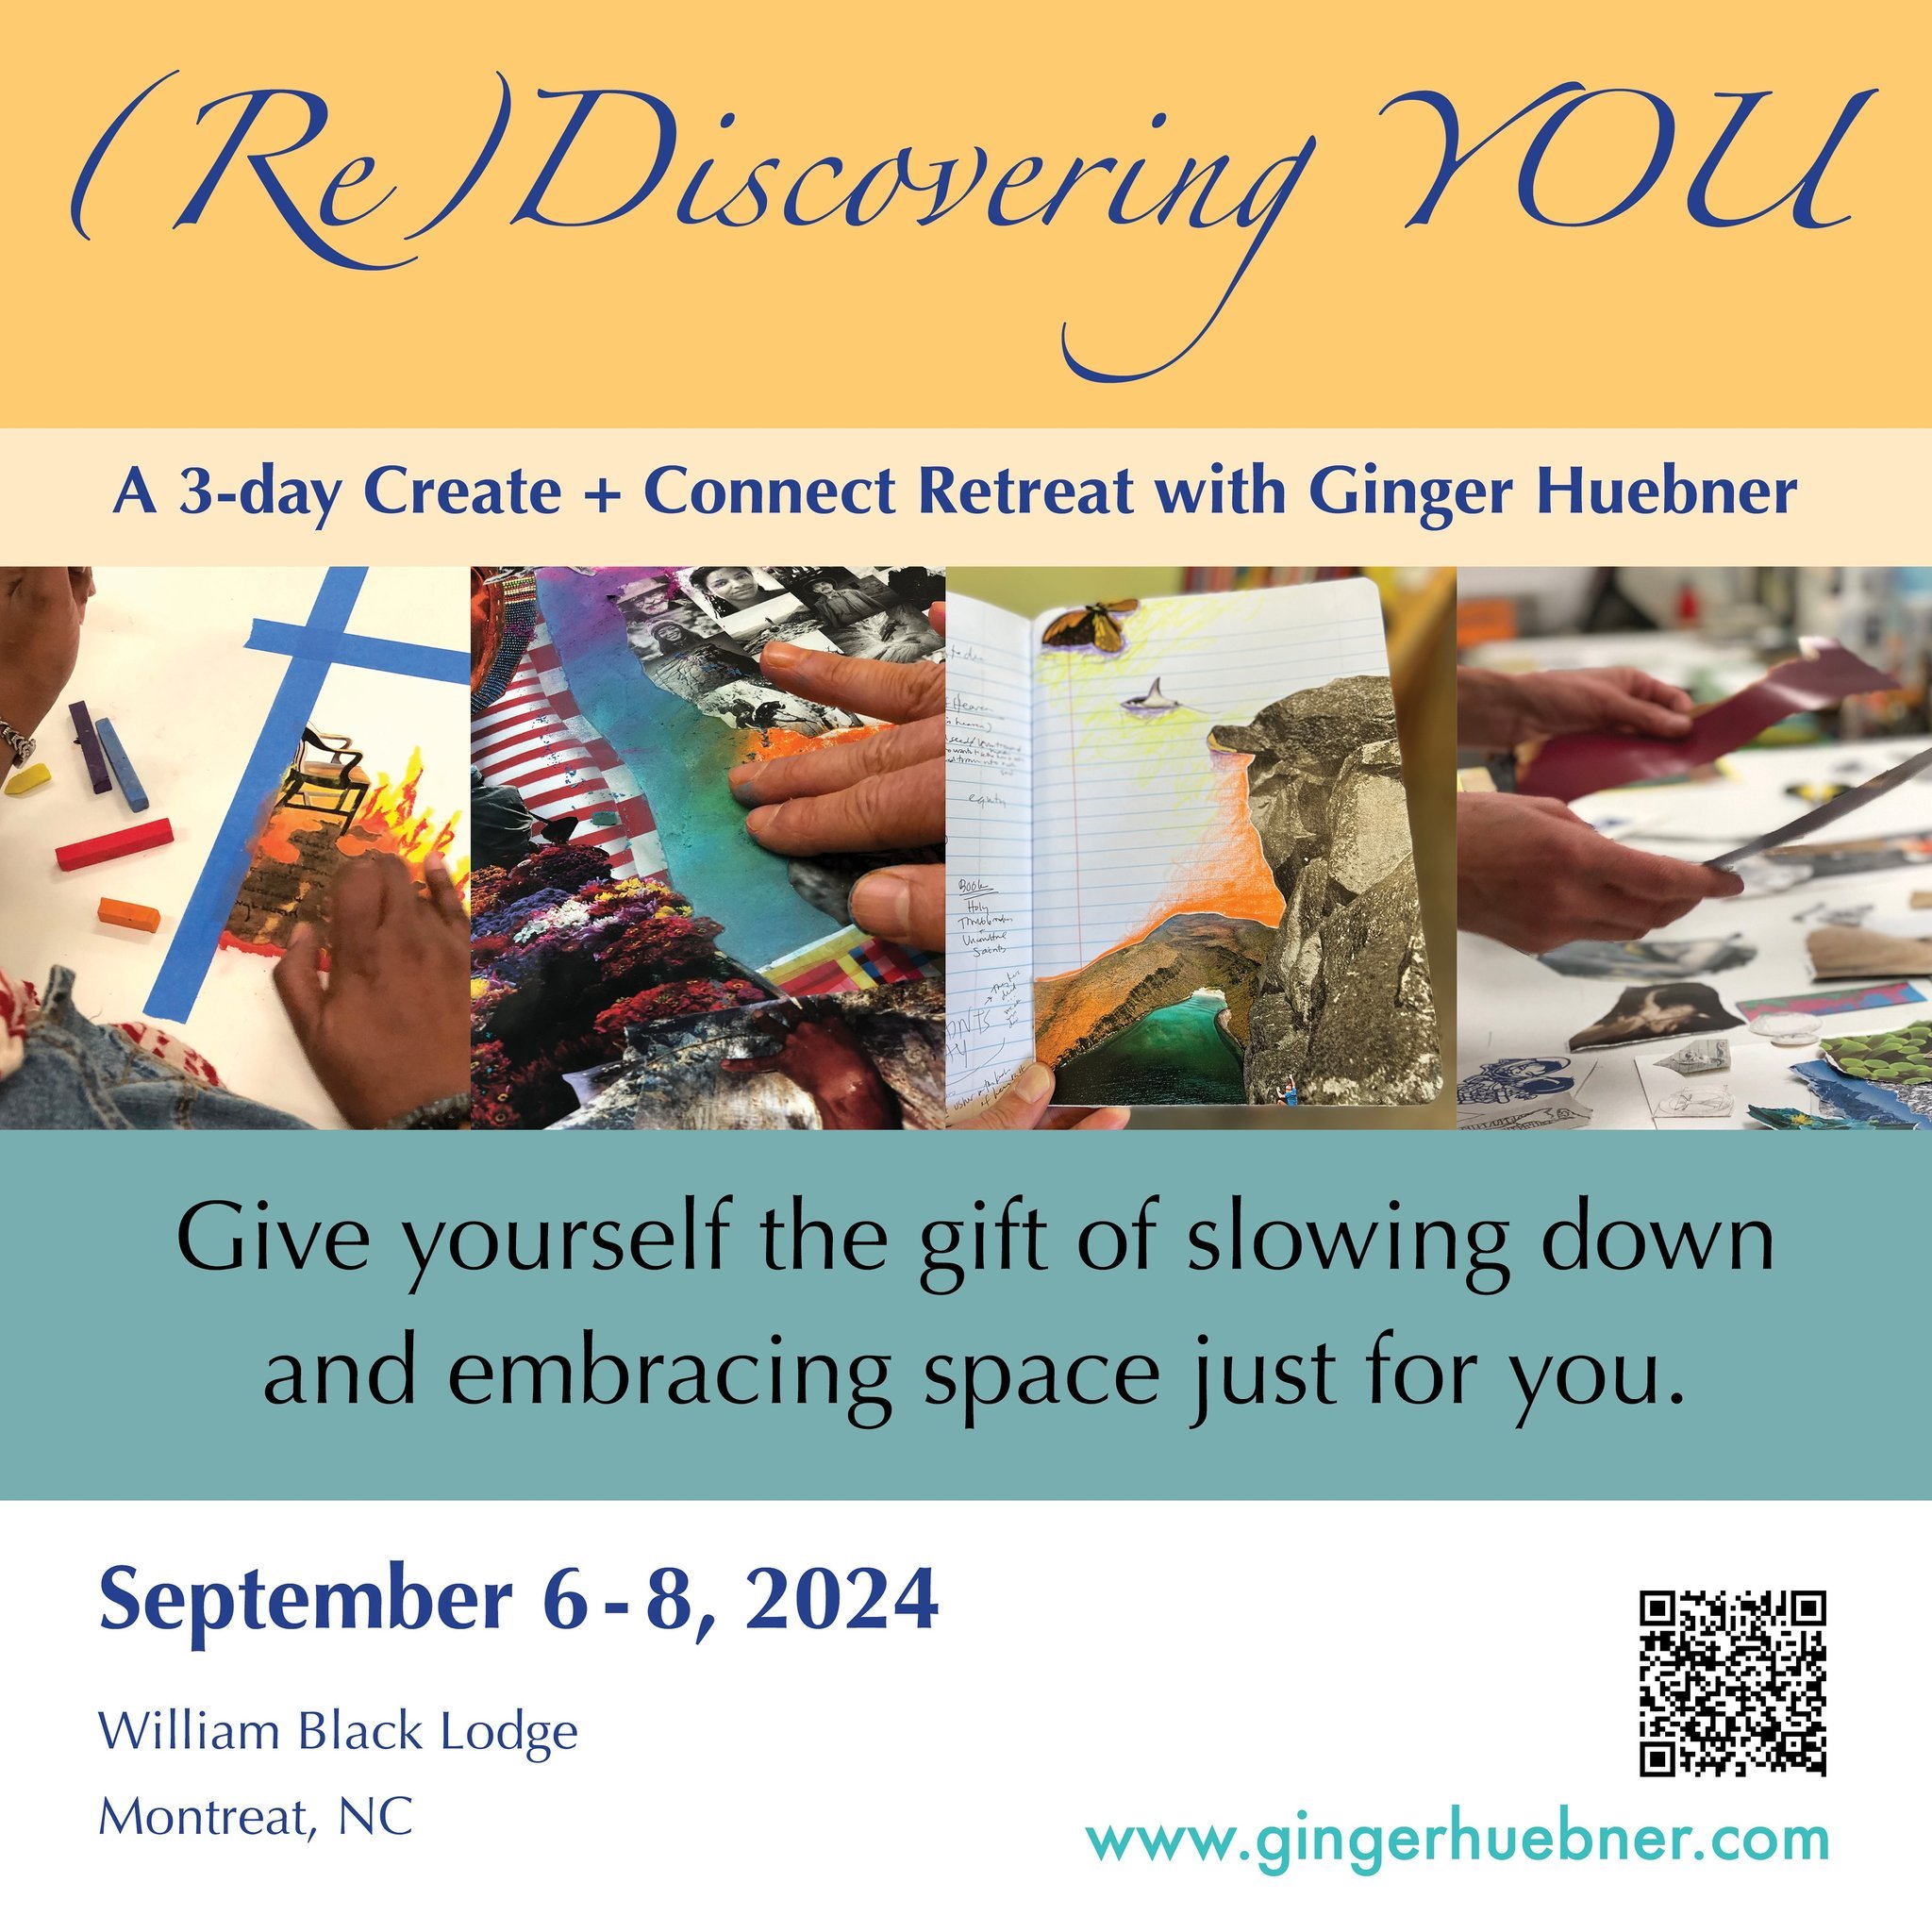 Looking for some creative time just for you? 

Soooo I have to hold on my Family retreat (challenges of scheduling!) BUT my September Retreat for Adults 18+ is still a go! 

(Re)Discovering YOU
September 6-8, 2024
William Black Lodge in Montreat, NC 